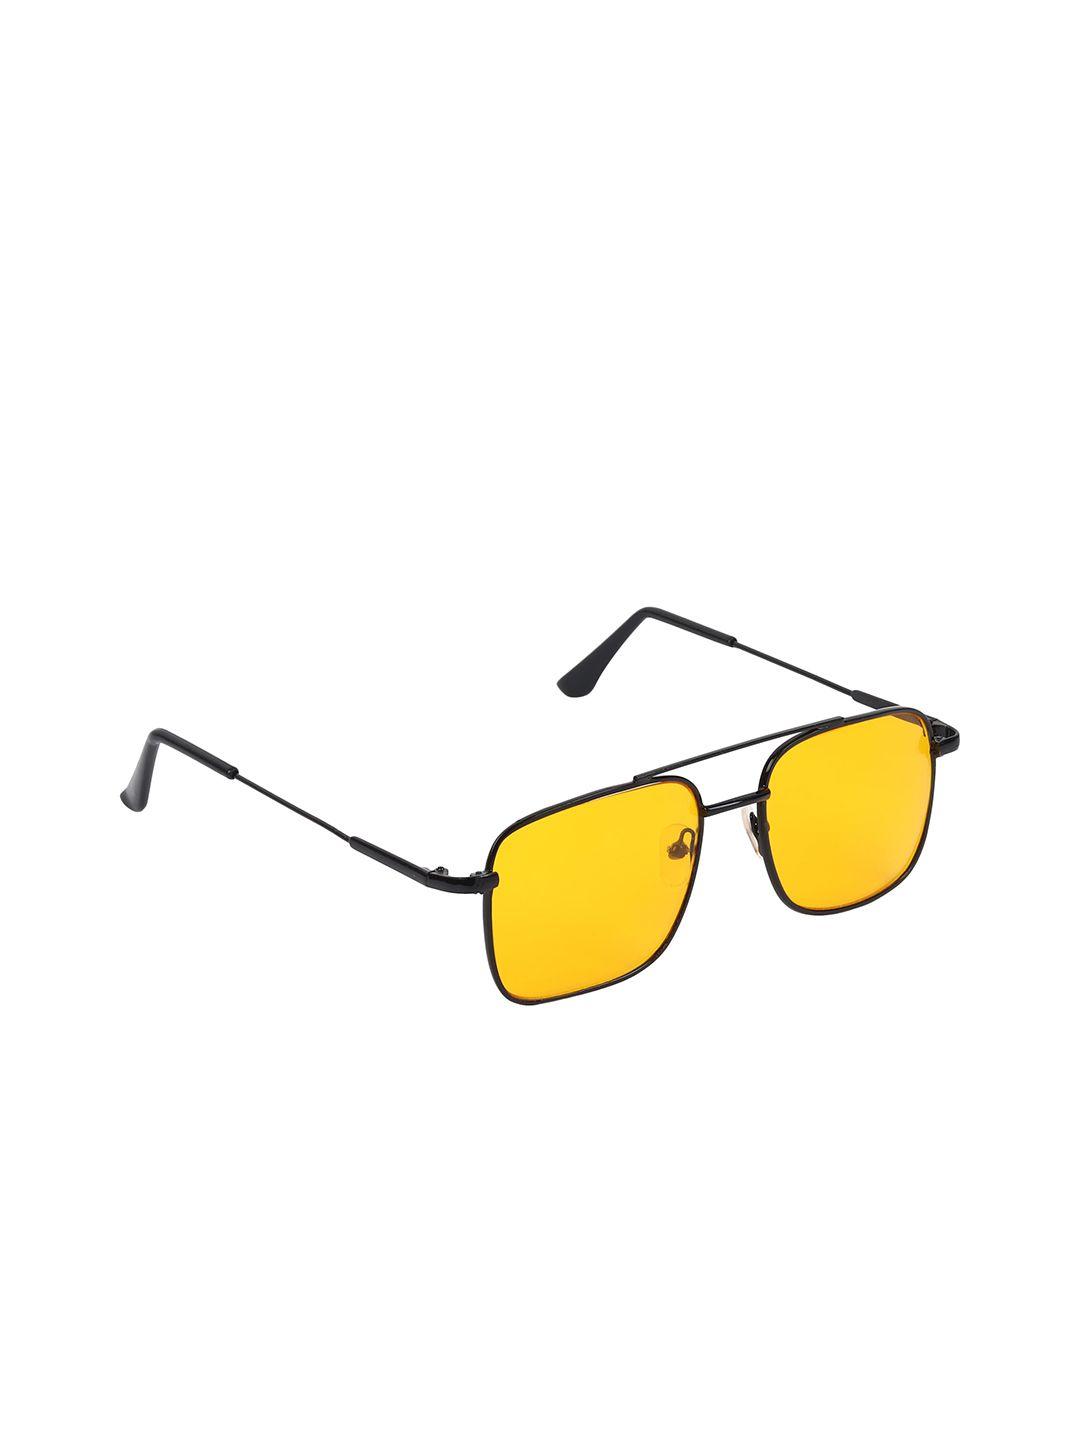 garth unisex yellow lens & black square sunglasses with uv protected lens